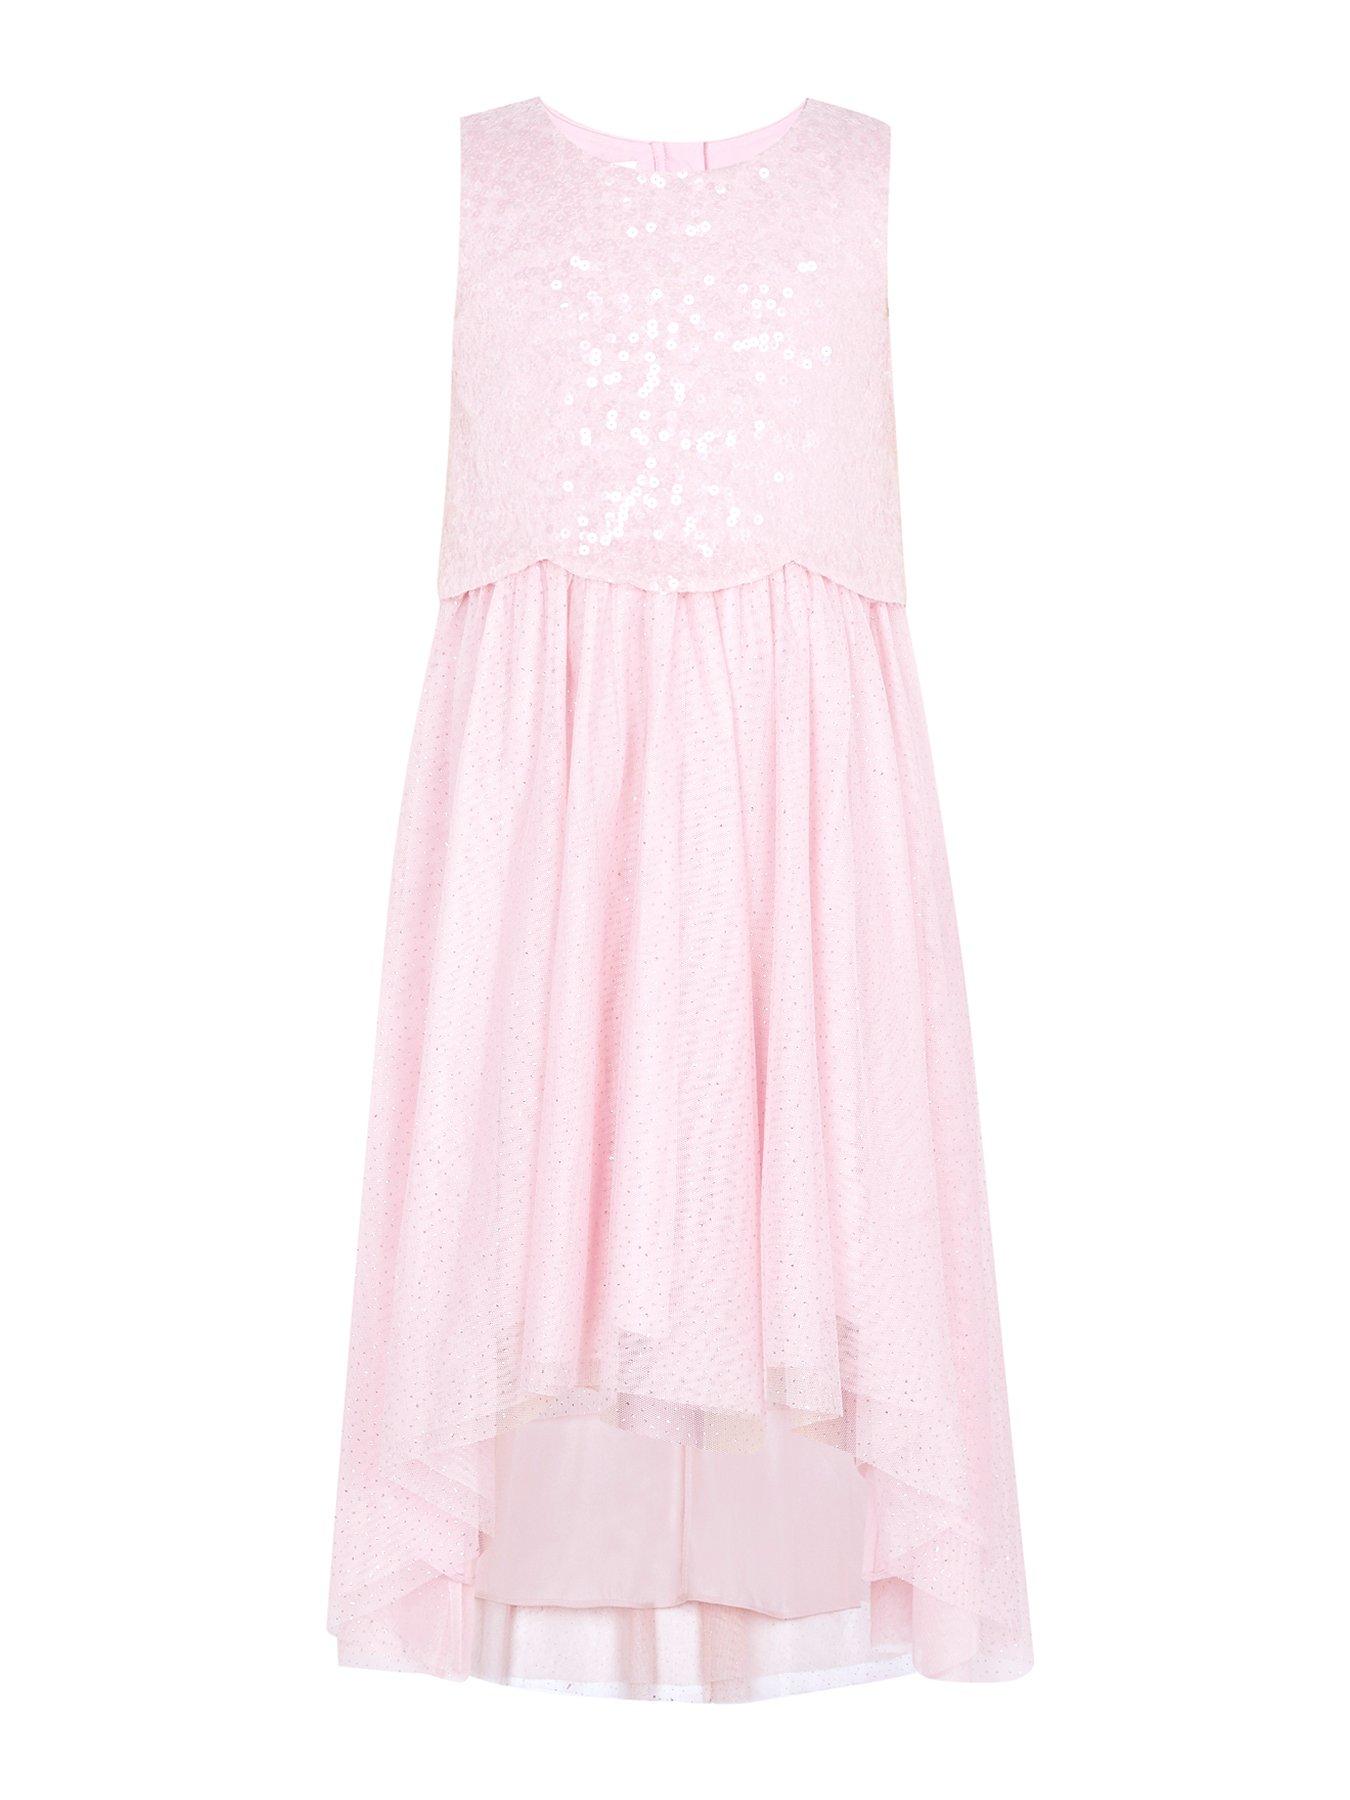 Occasion & wear Girls Betsy Sequin Scallop Dress - Pink